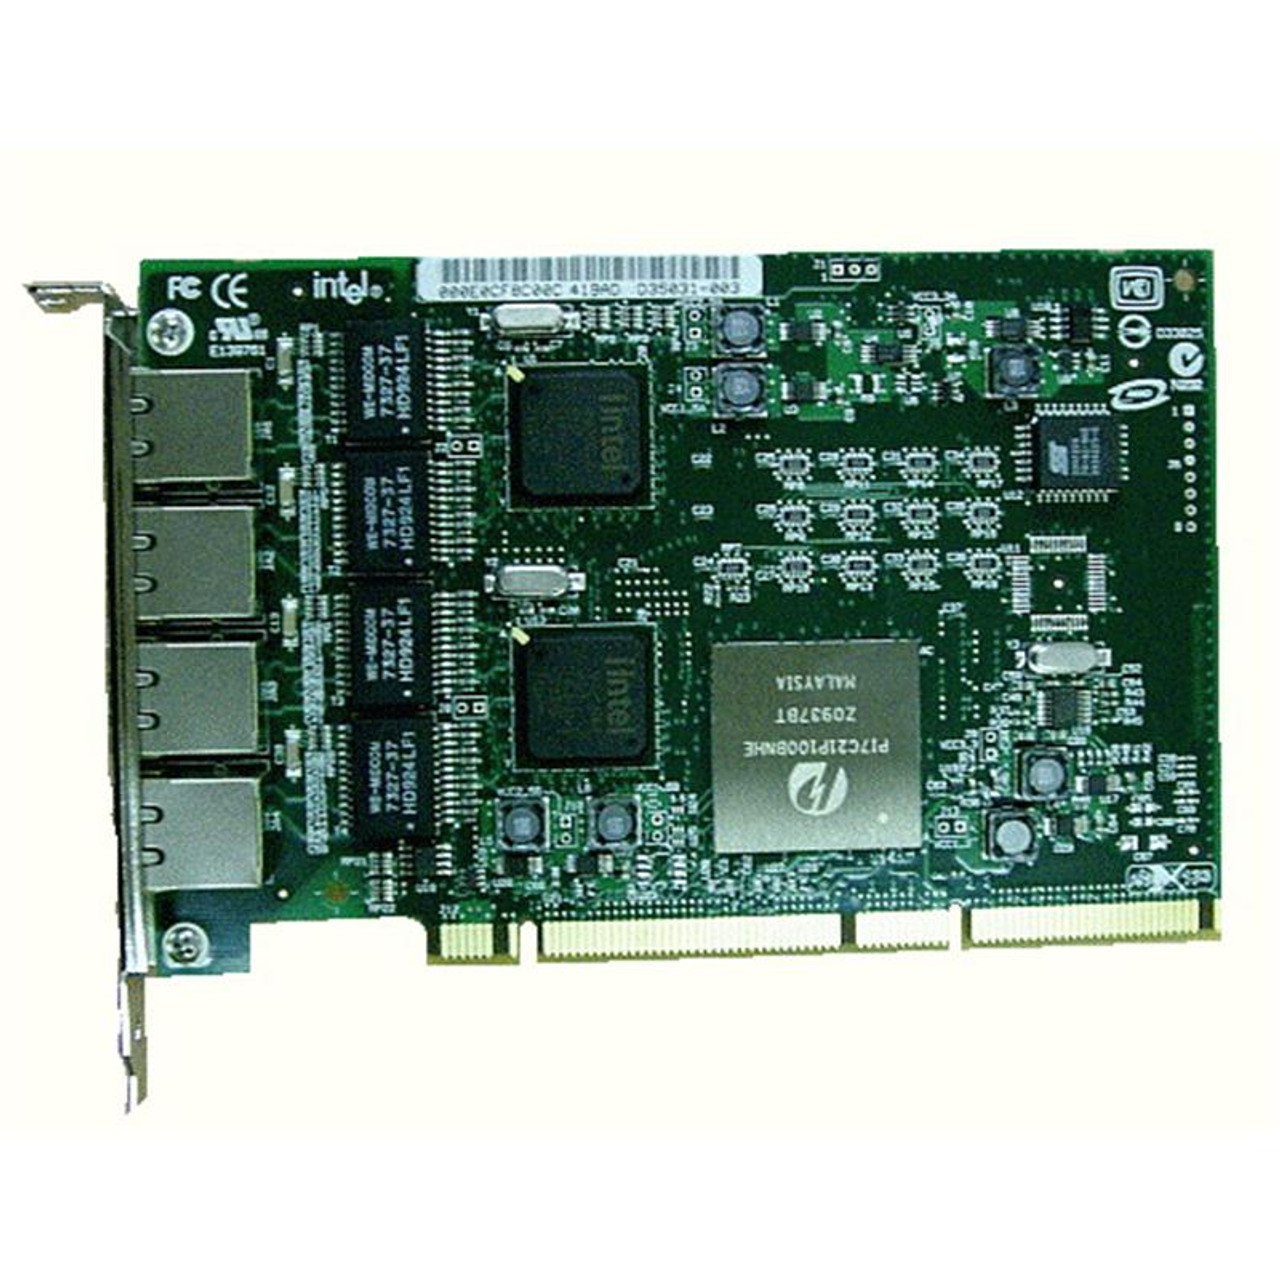 73P5201 IBM PRO/1000 GT Quad-Ports 1Gbps 10Base-T/100Base-TX/1000Base-T Ethernet PCI-X Server Network Adapter by Intel